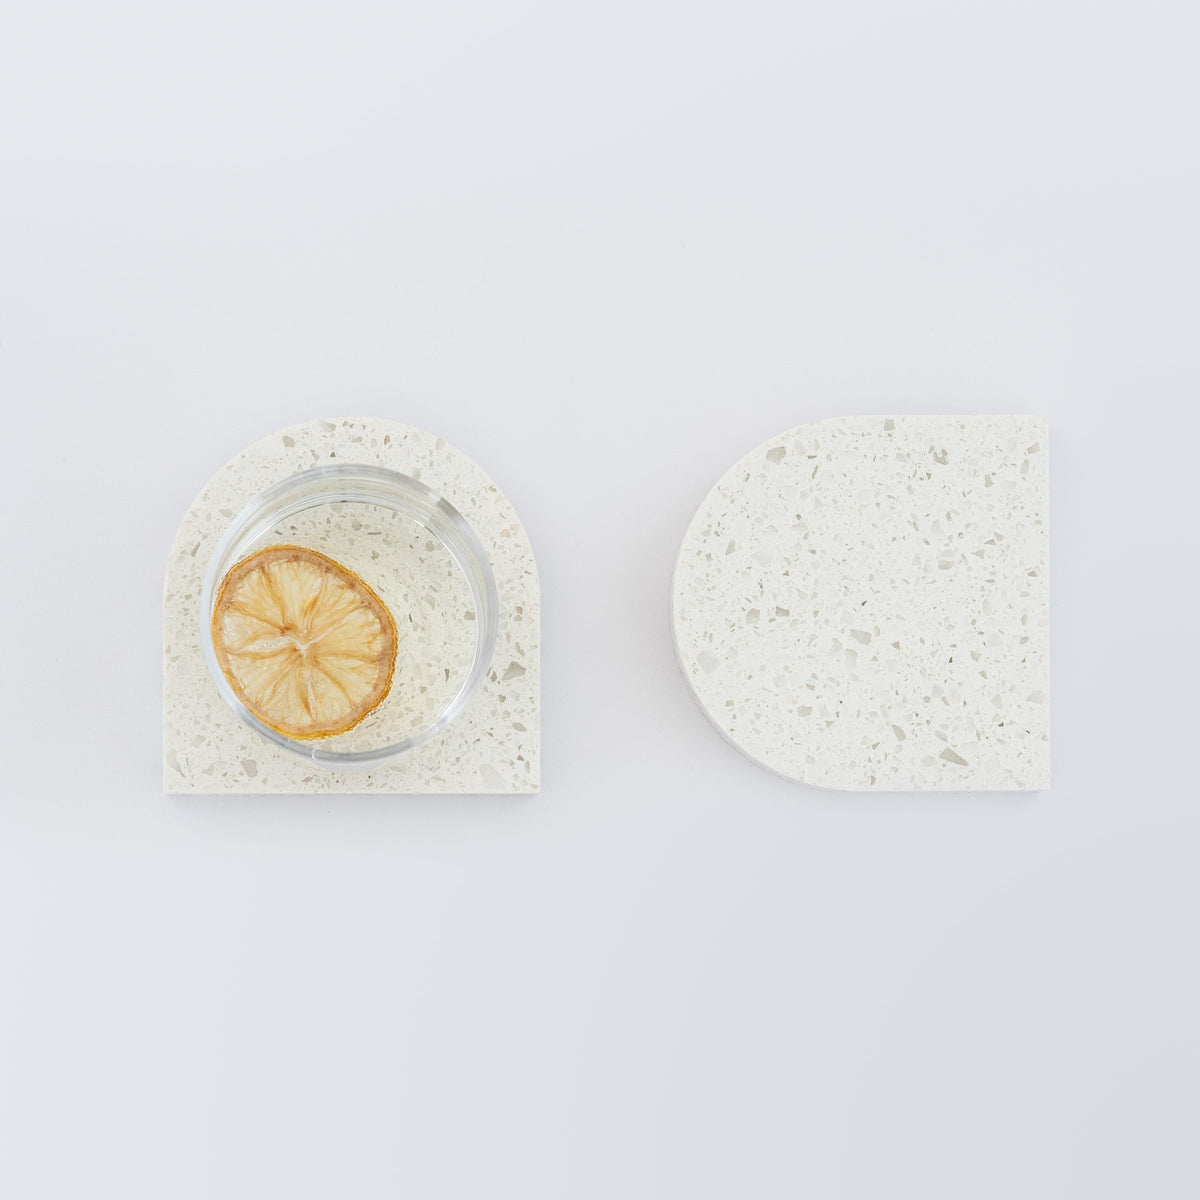 Quartz Arch Coaster™ 2 Piece in Nougat™. Quartz white stone coasters in an arch shape. These white quartz coasters are specked with decorative quartz with a cork backing. White marble coasters in appearance however quartz has greater scratch resistance and is lower maintenance. caesarstone.